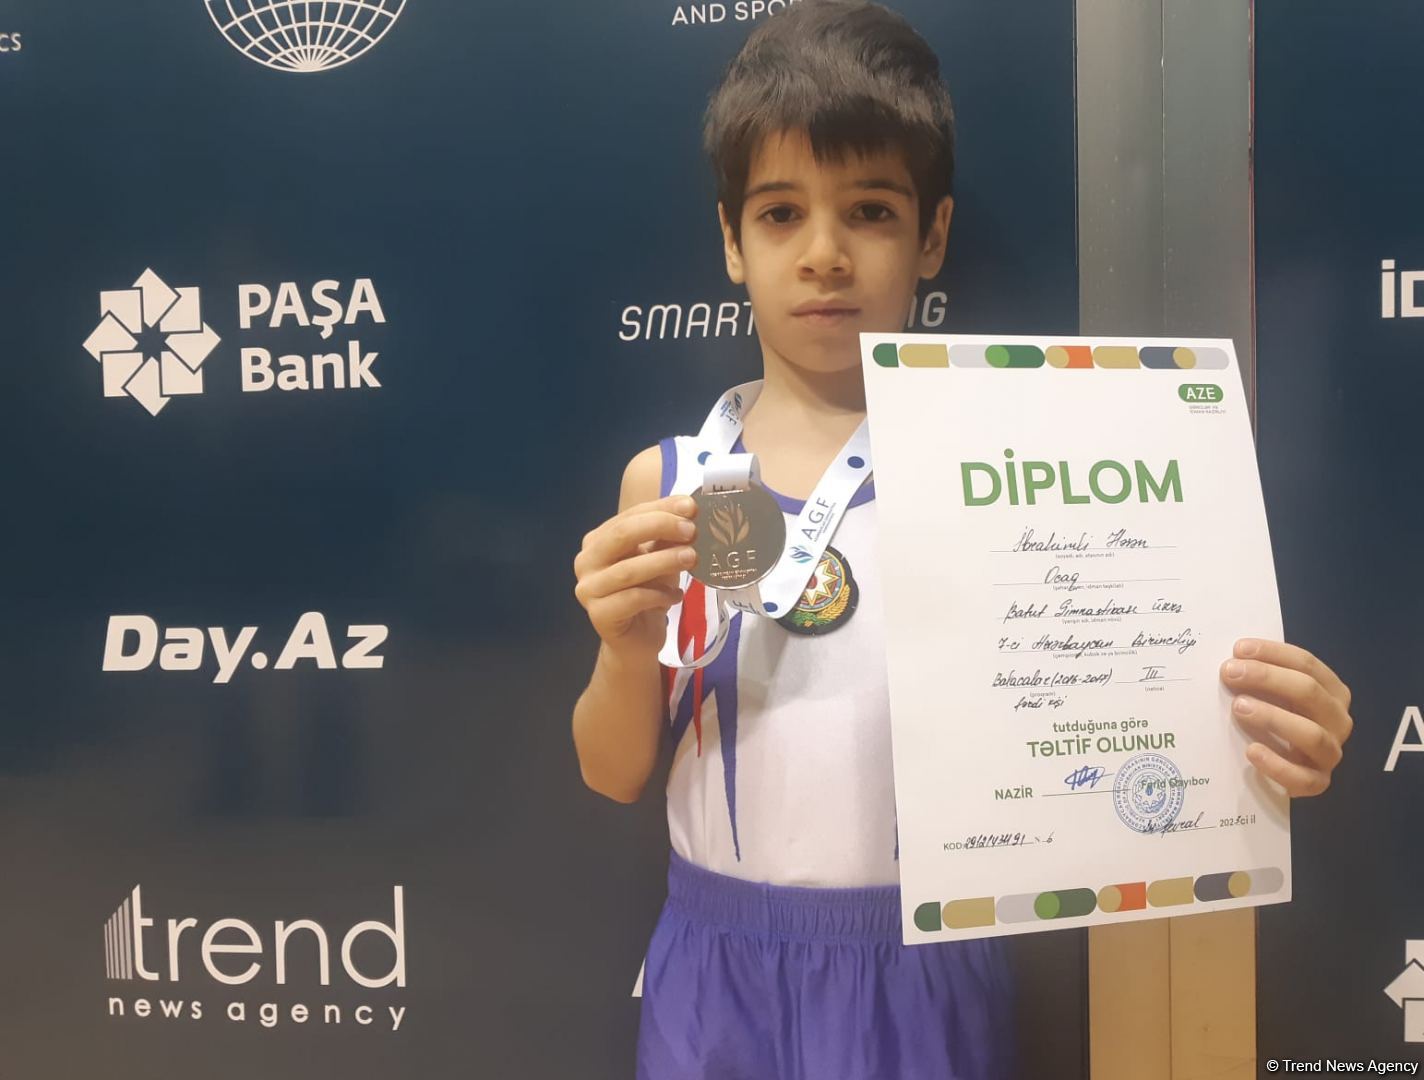 Azerbaijani athlete shares joy from winning bronze medal at his first tumbling competition